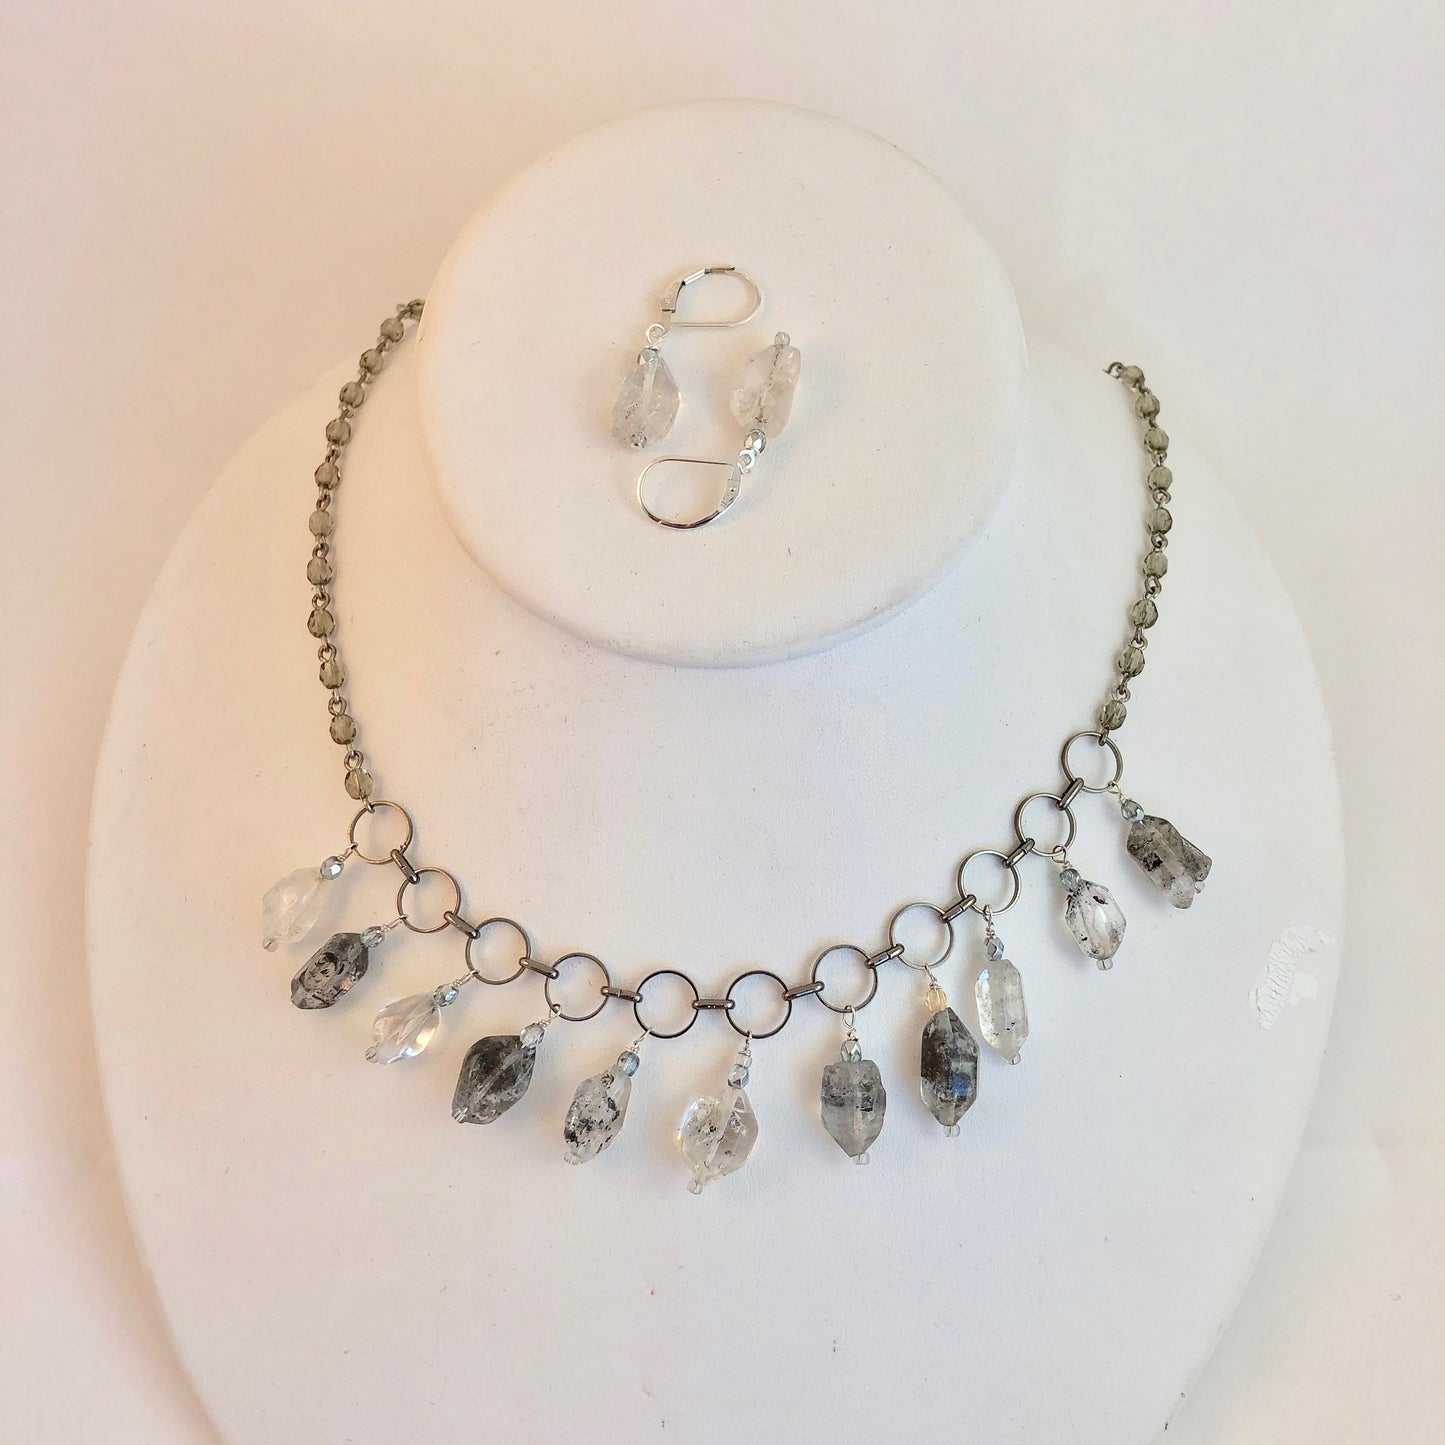 Necklace of crystal quartz gemstone, which offer strength.  Stones hang from metal circles, stung on a chain with glass embedded stones.